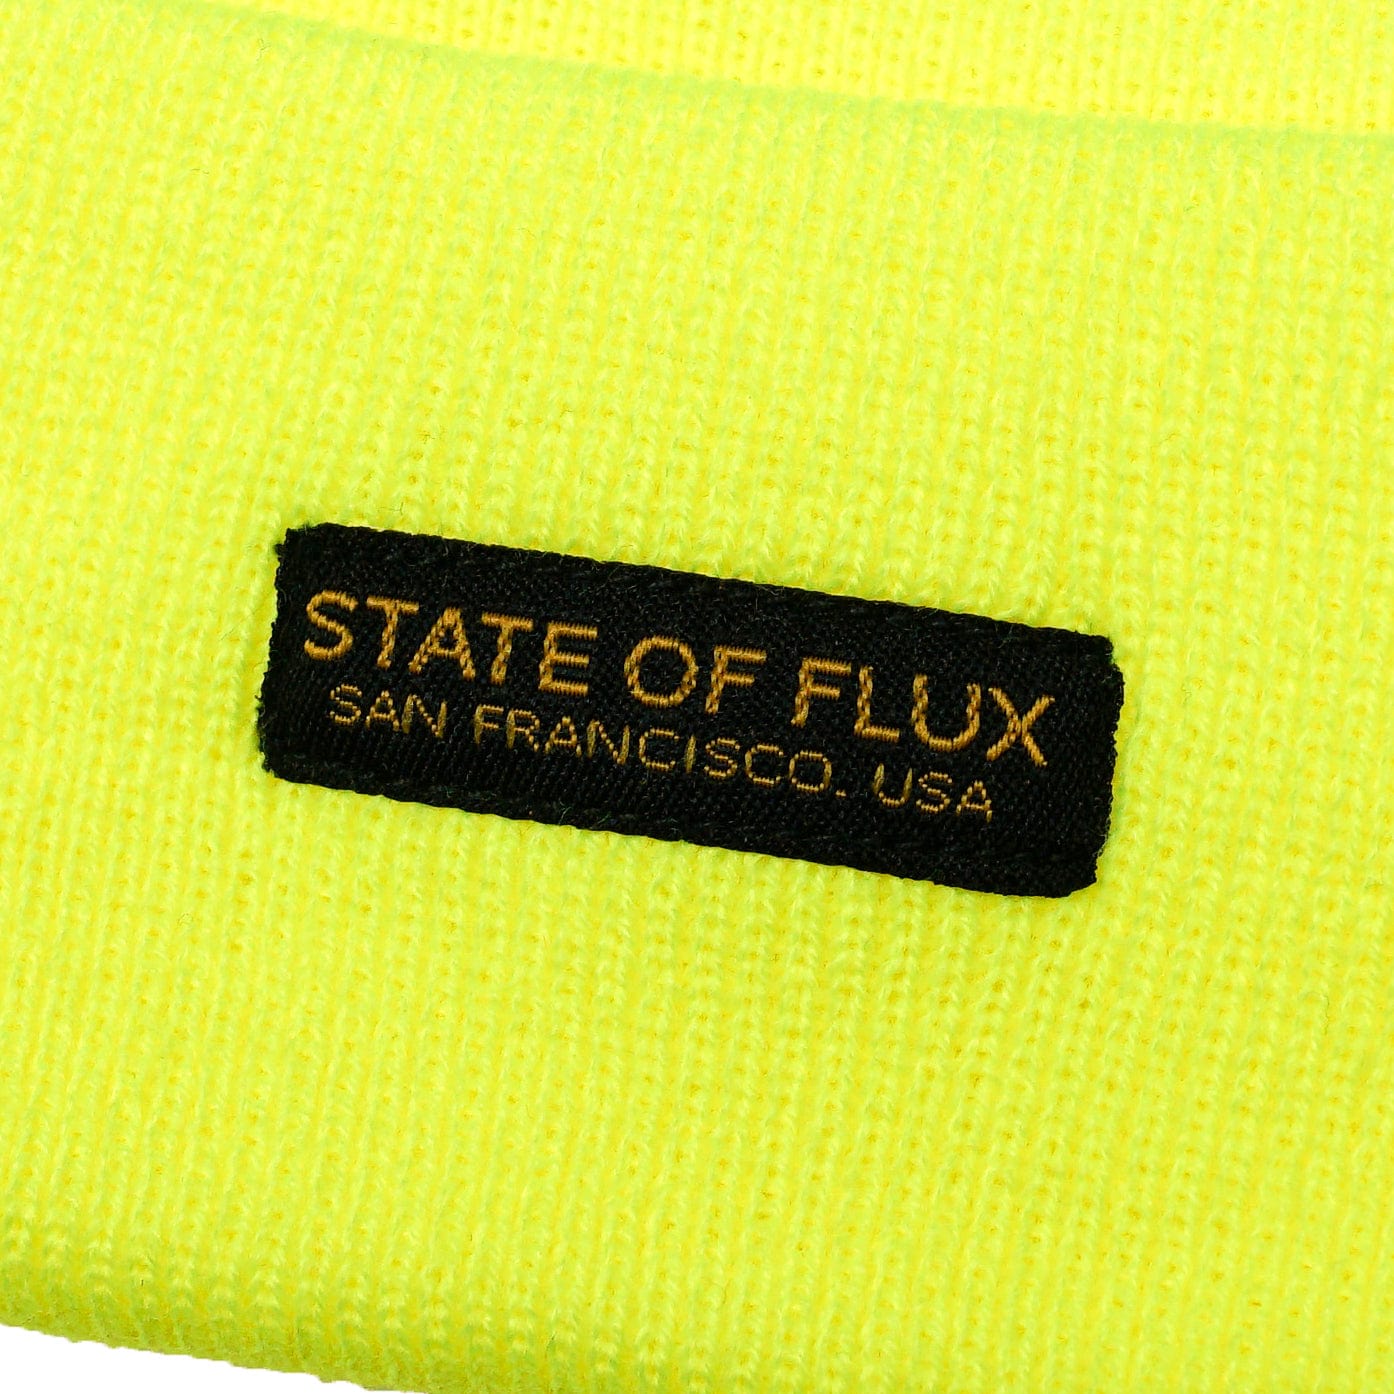 Insulated Mantra Beanie in neon yellow